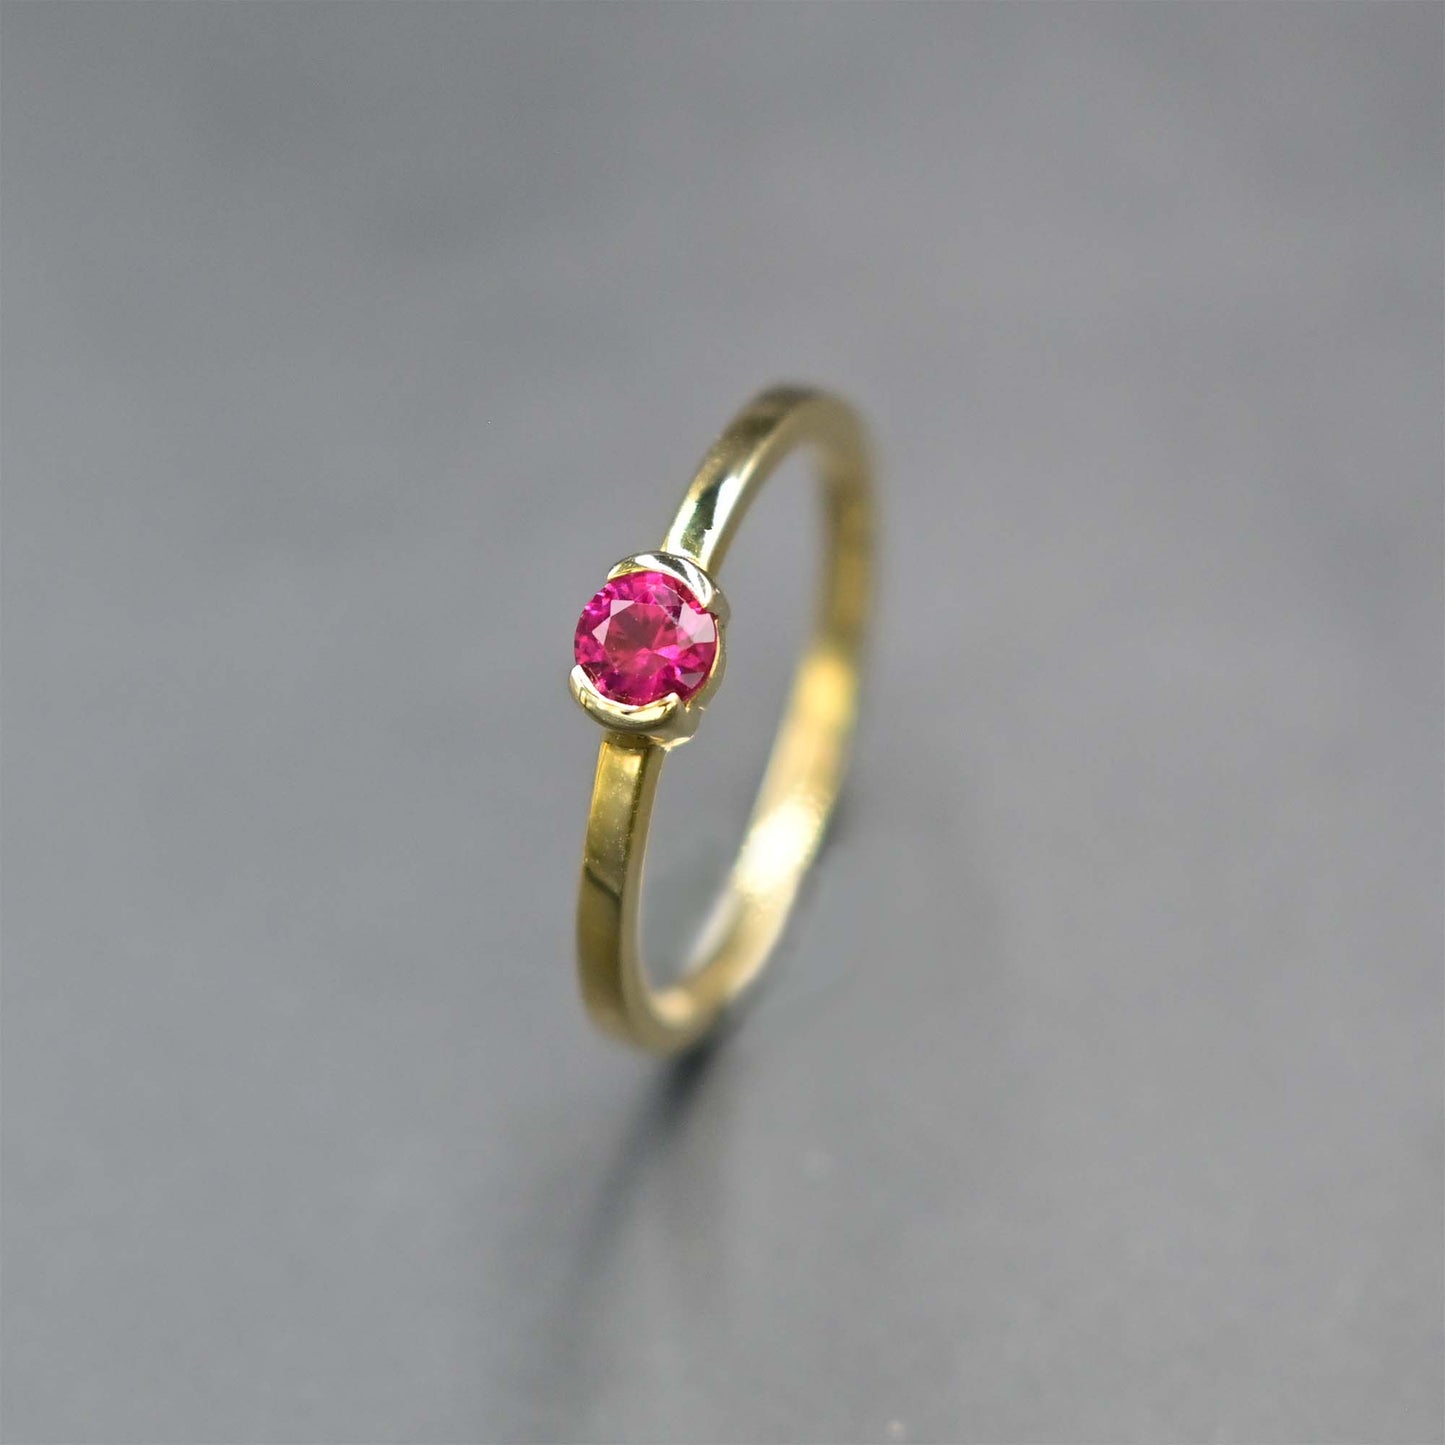 Ruby ring from Chiang Mai, Thailand